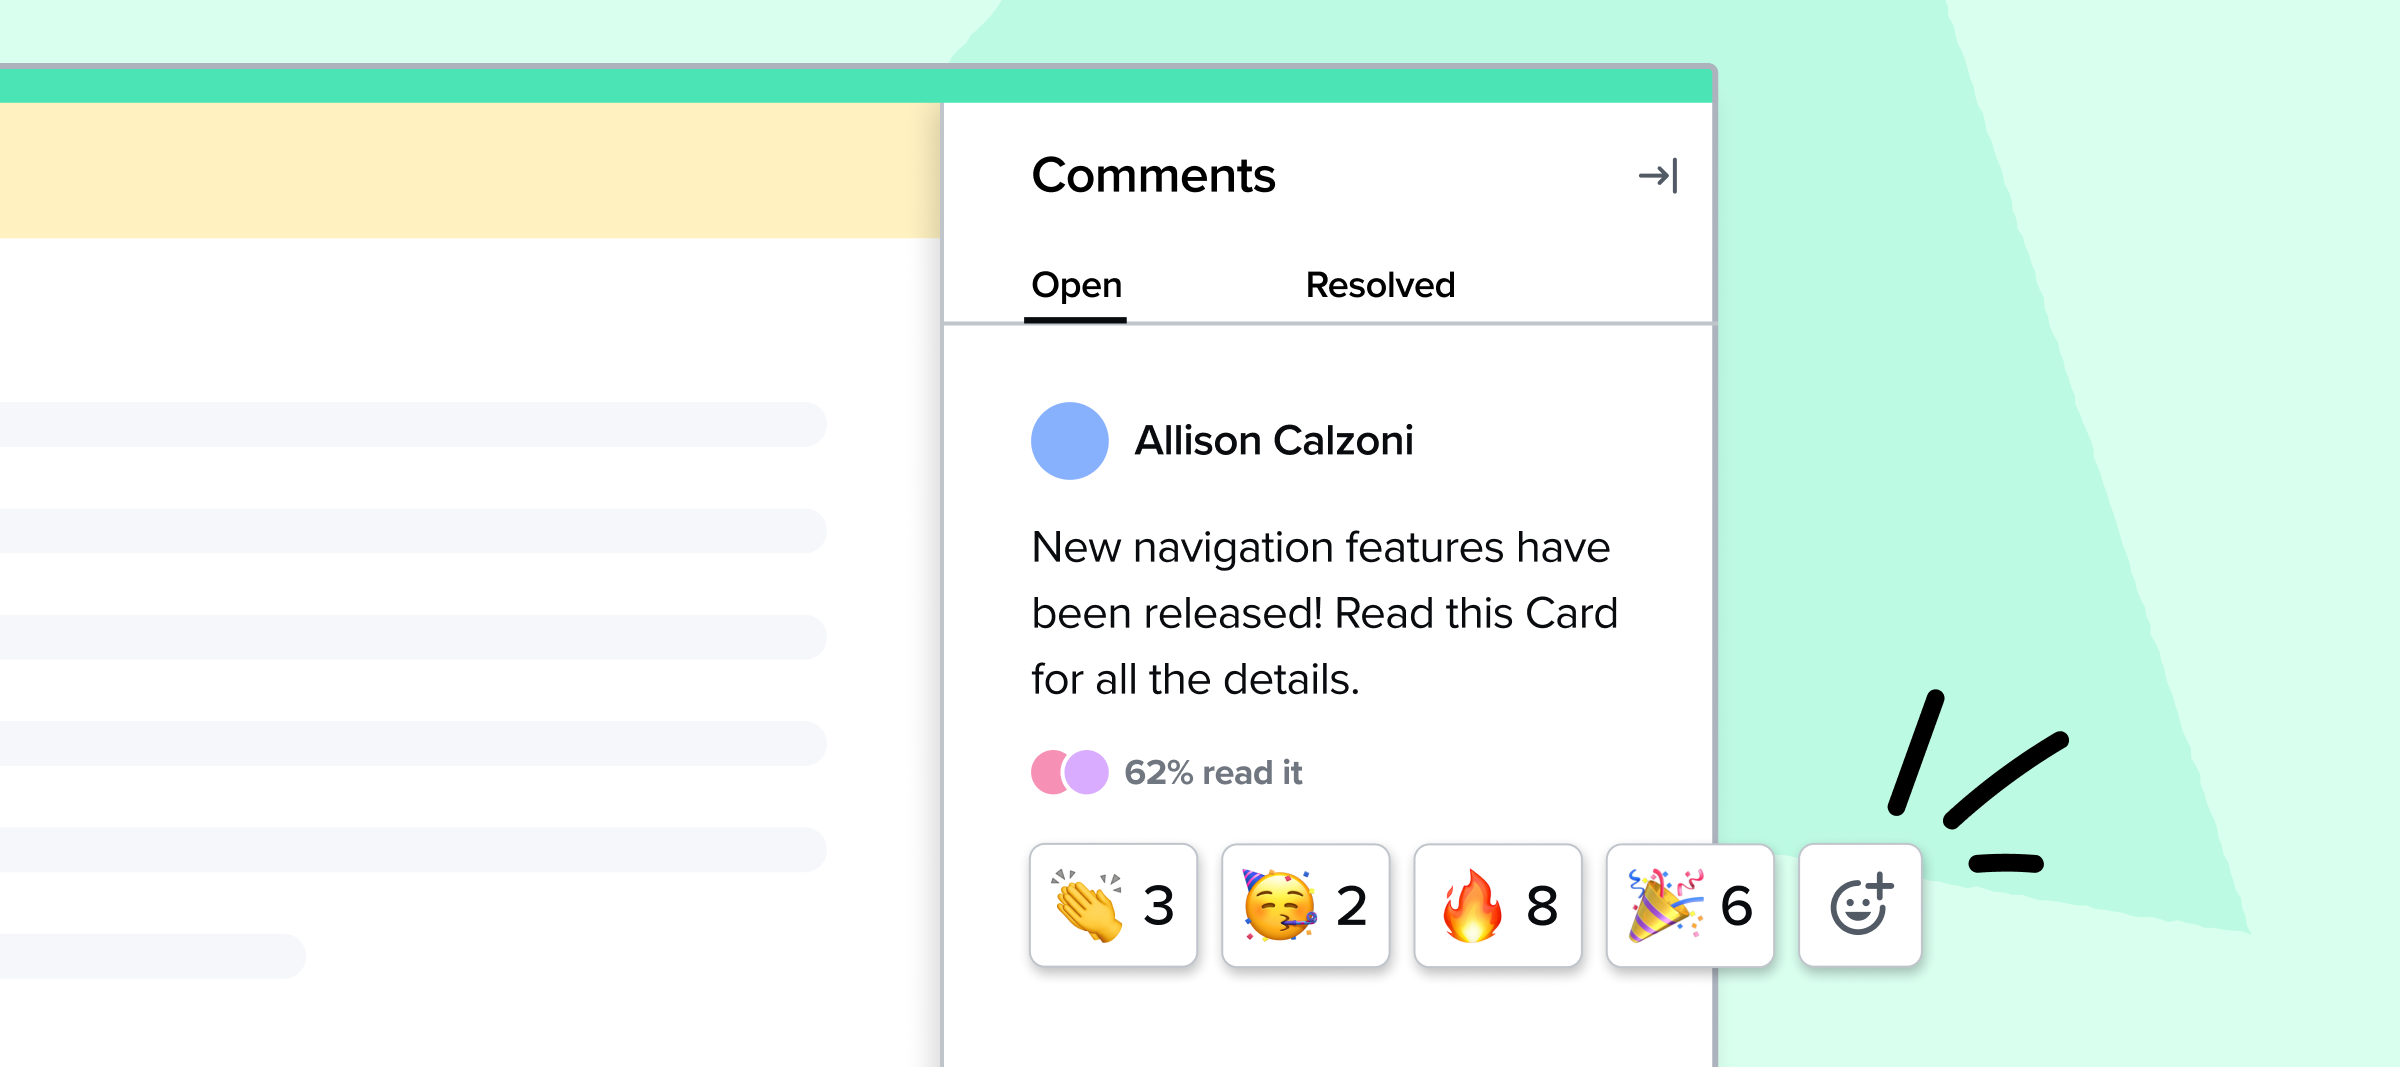 Announcements updates: new options for tracking engagement, commenting, and notifications